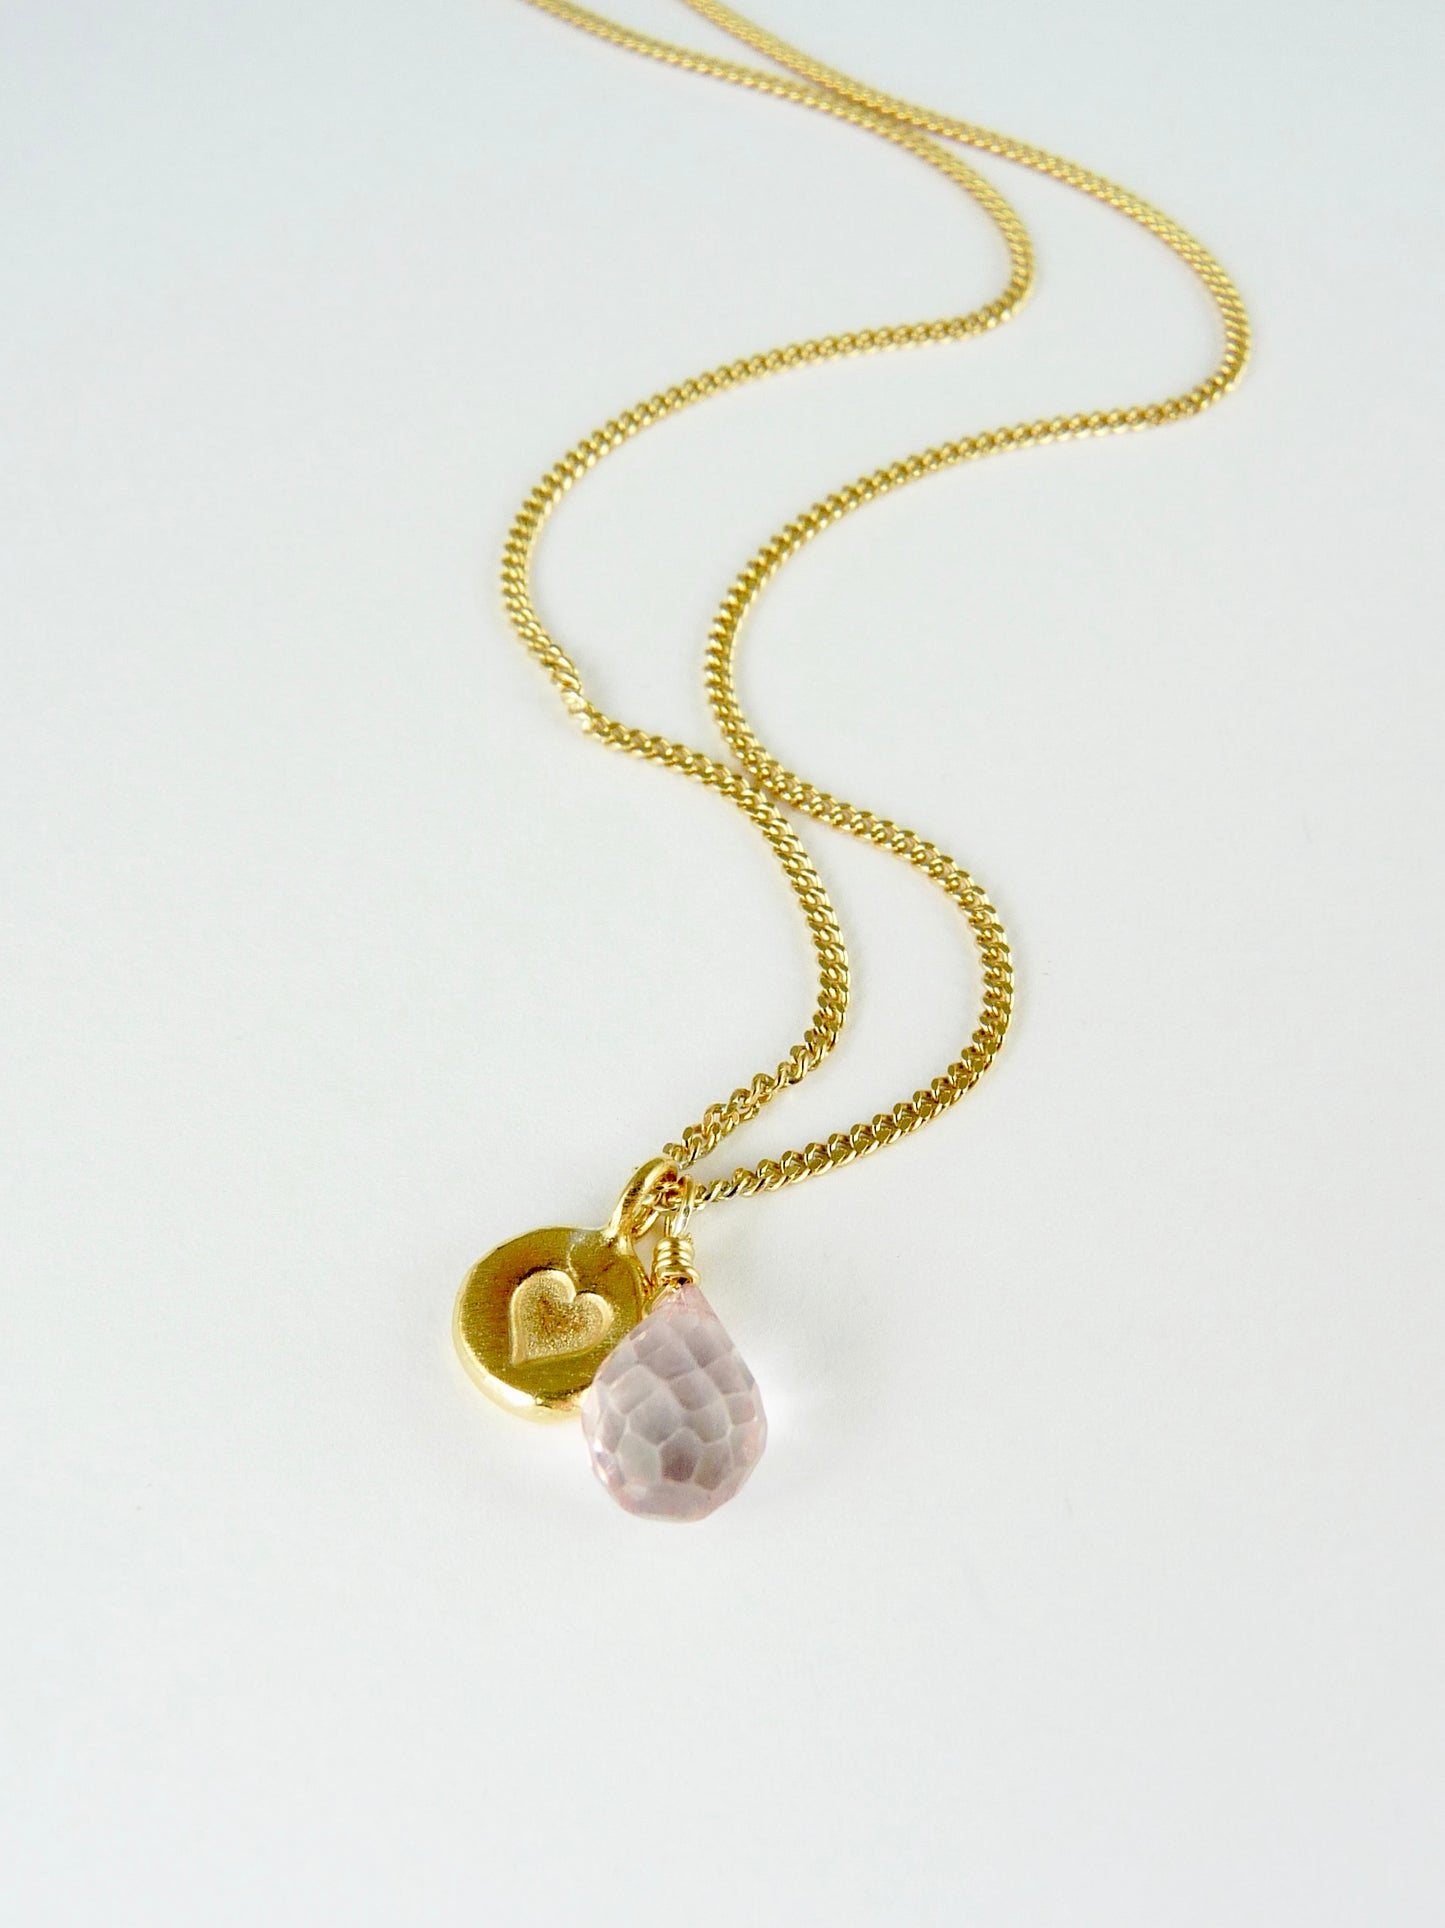 Heart Stamped Necklace with Gemstone